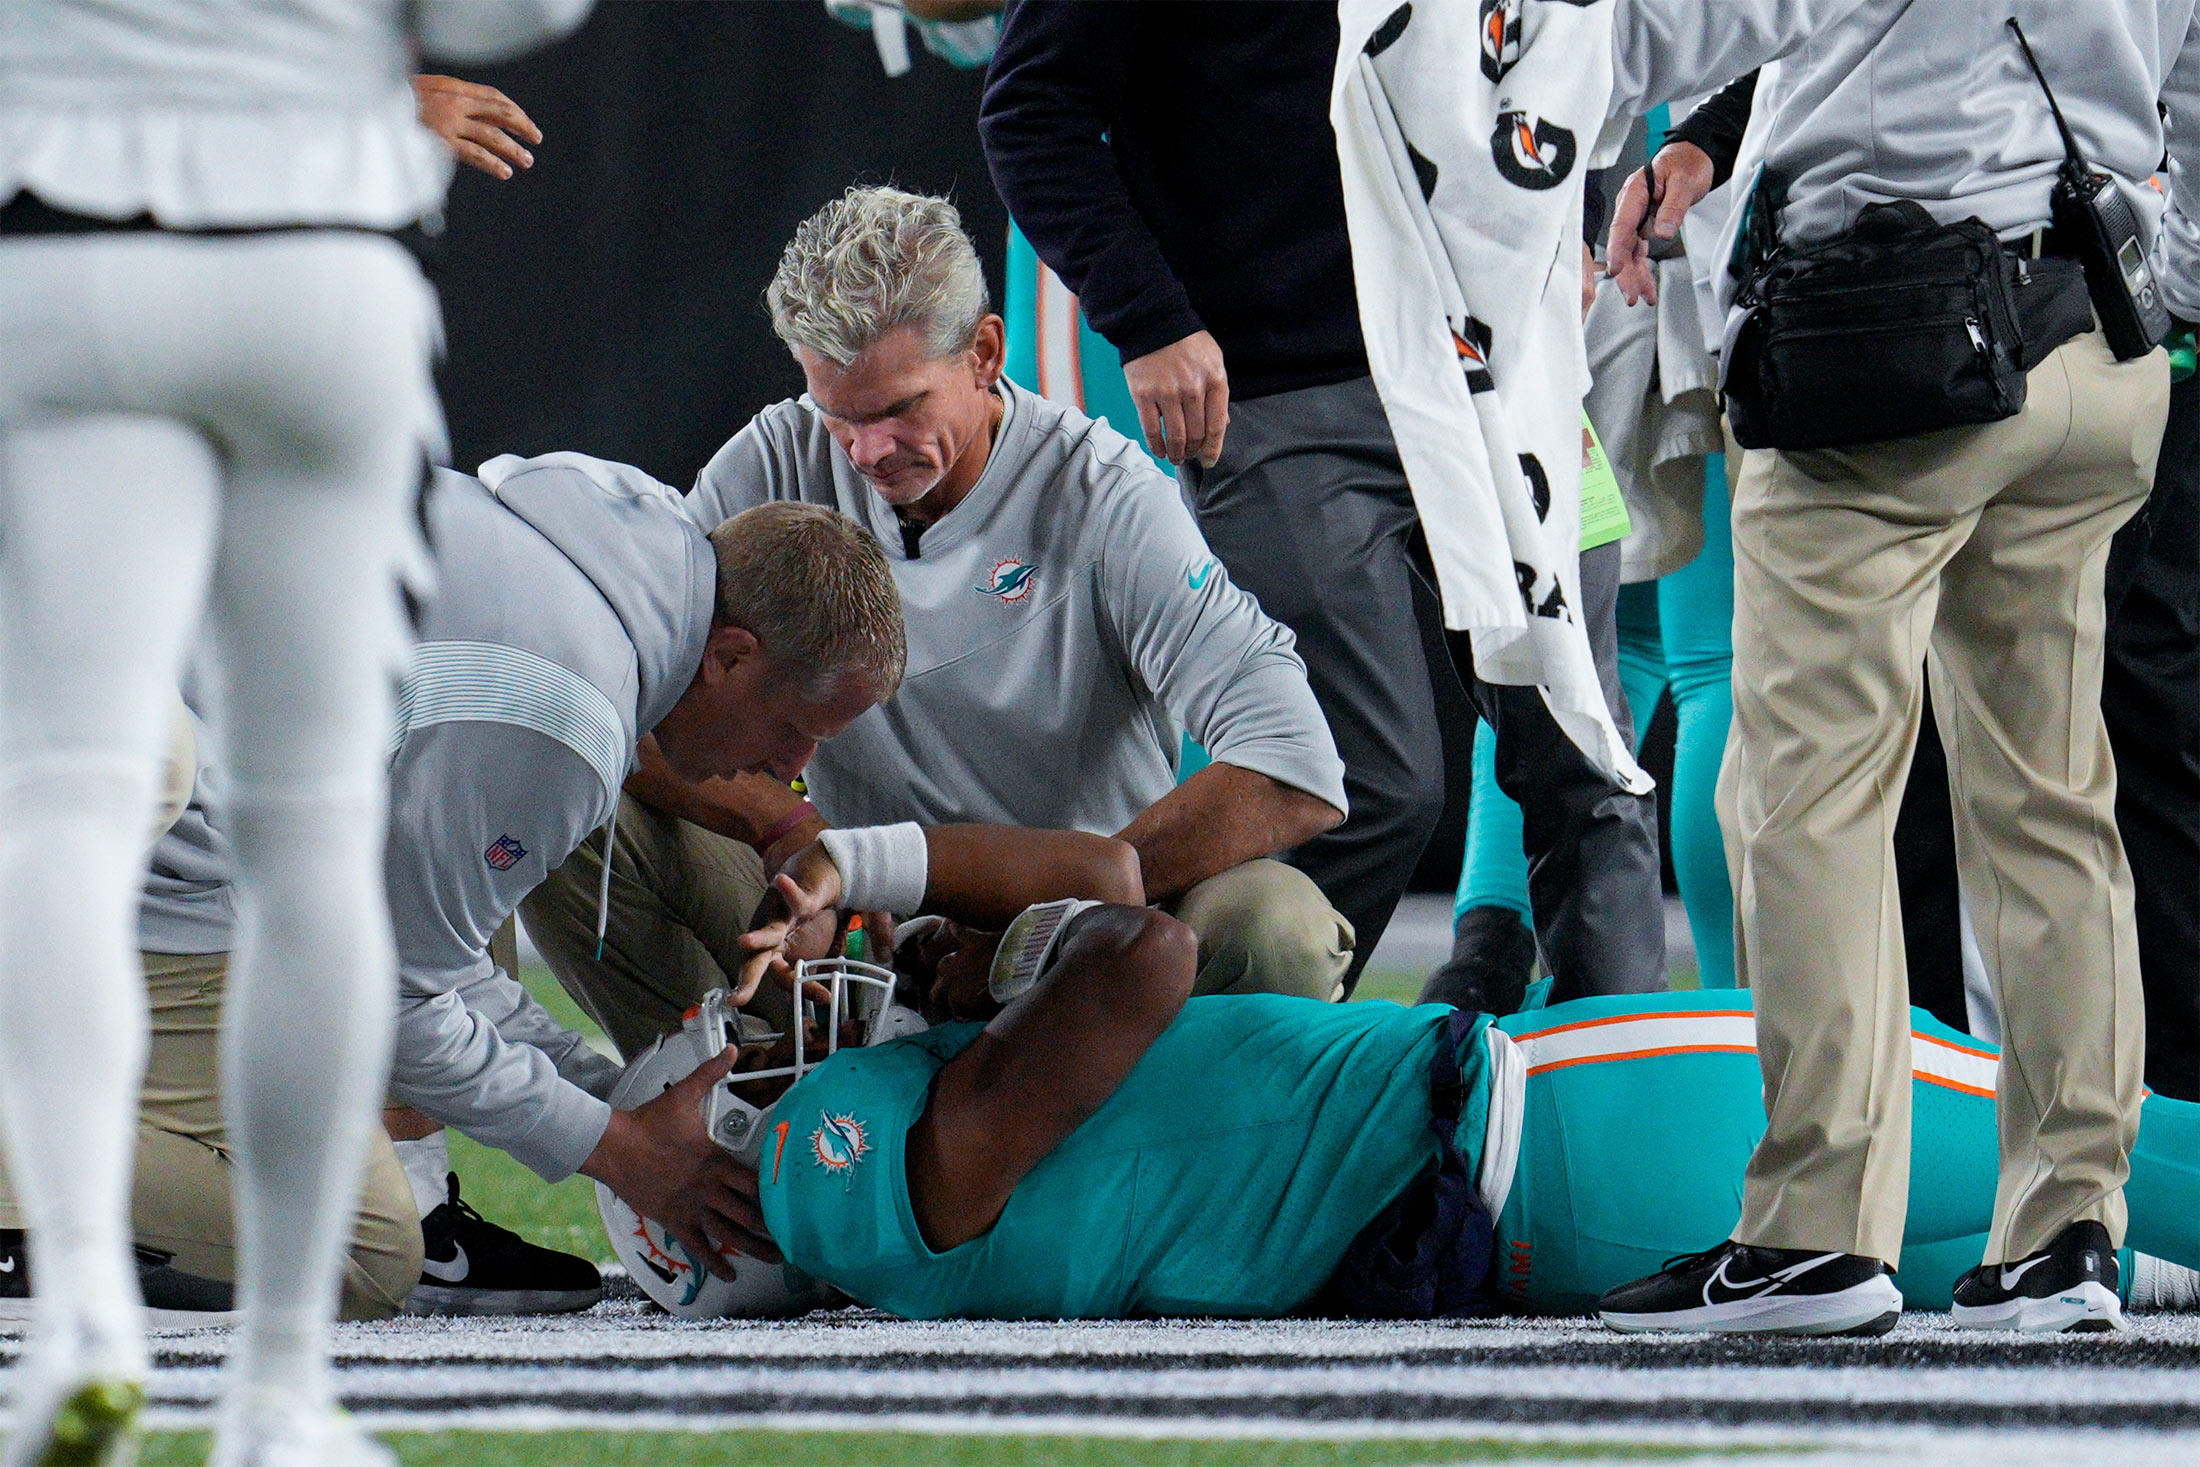 Headaches would ensue if any Dolphins game has to be rescheduled